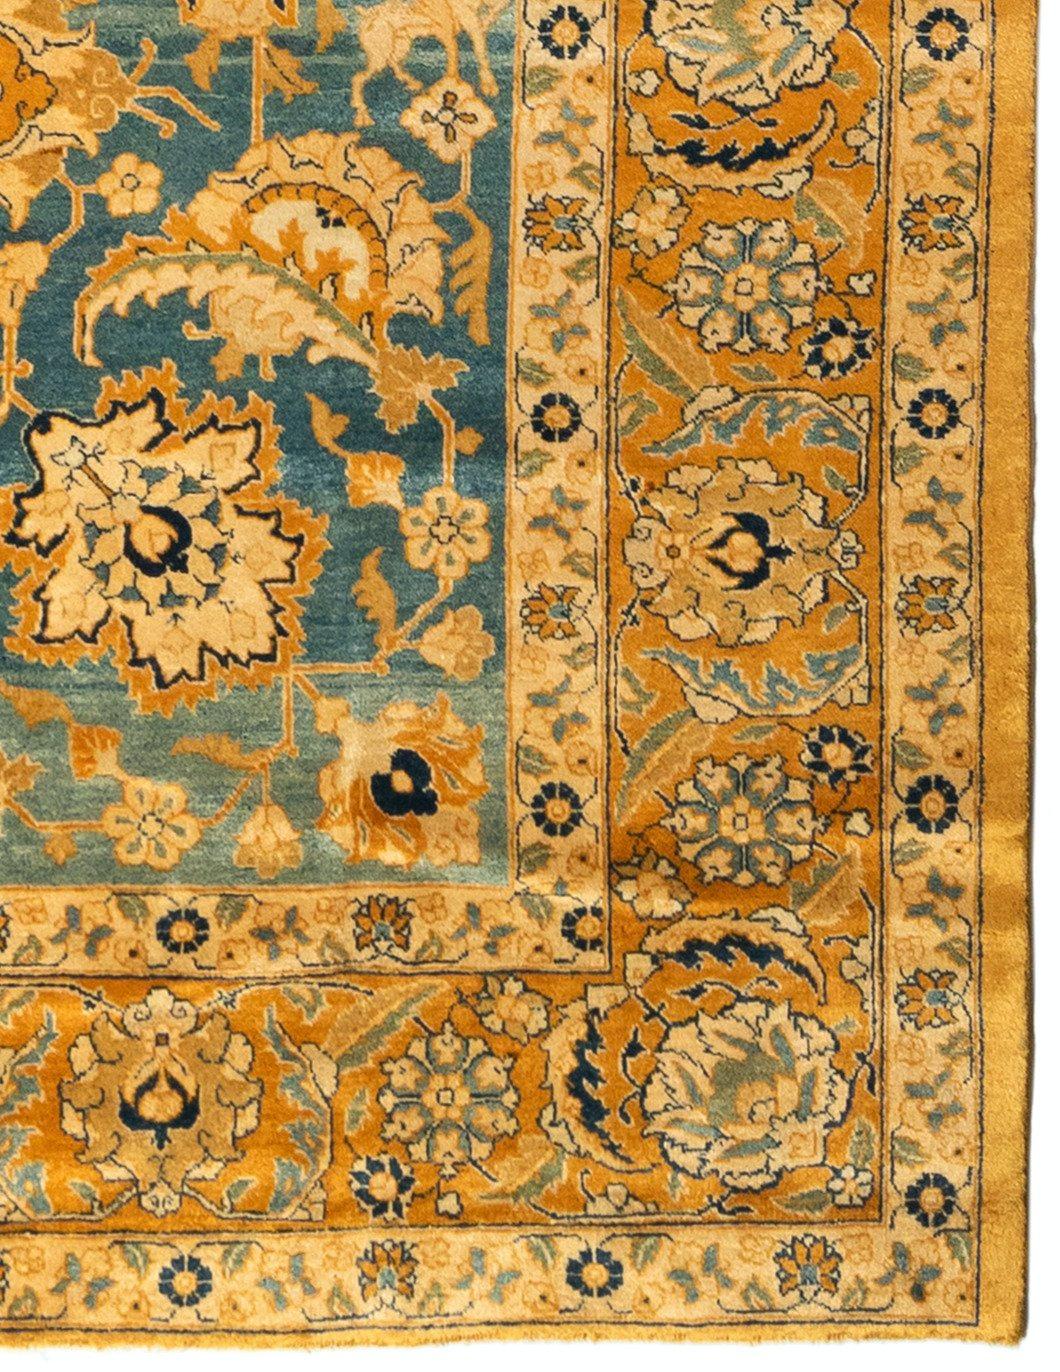 Hand-Knotted Antique Persian Gold Blue Tabriz Hunting Design Rug Birds Animals c. 1900 For Sale